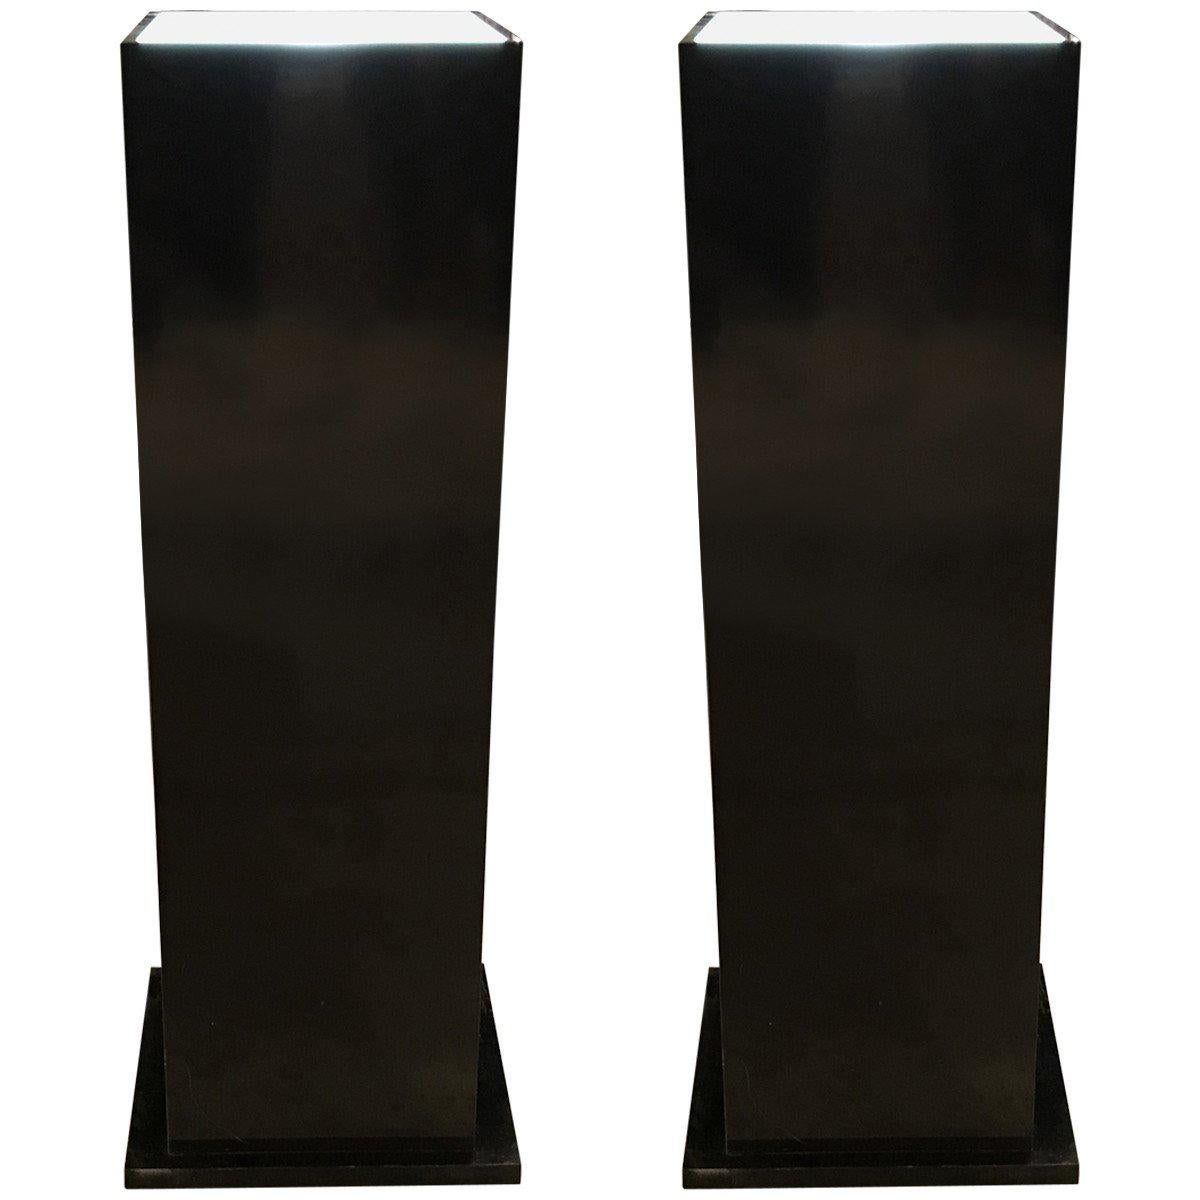 Contemporary Modern Lacquered Wood Lighted Pedestals For Sale